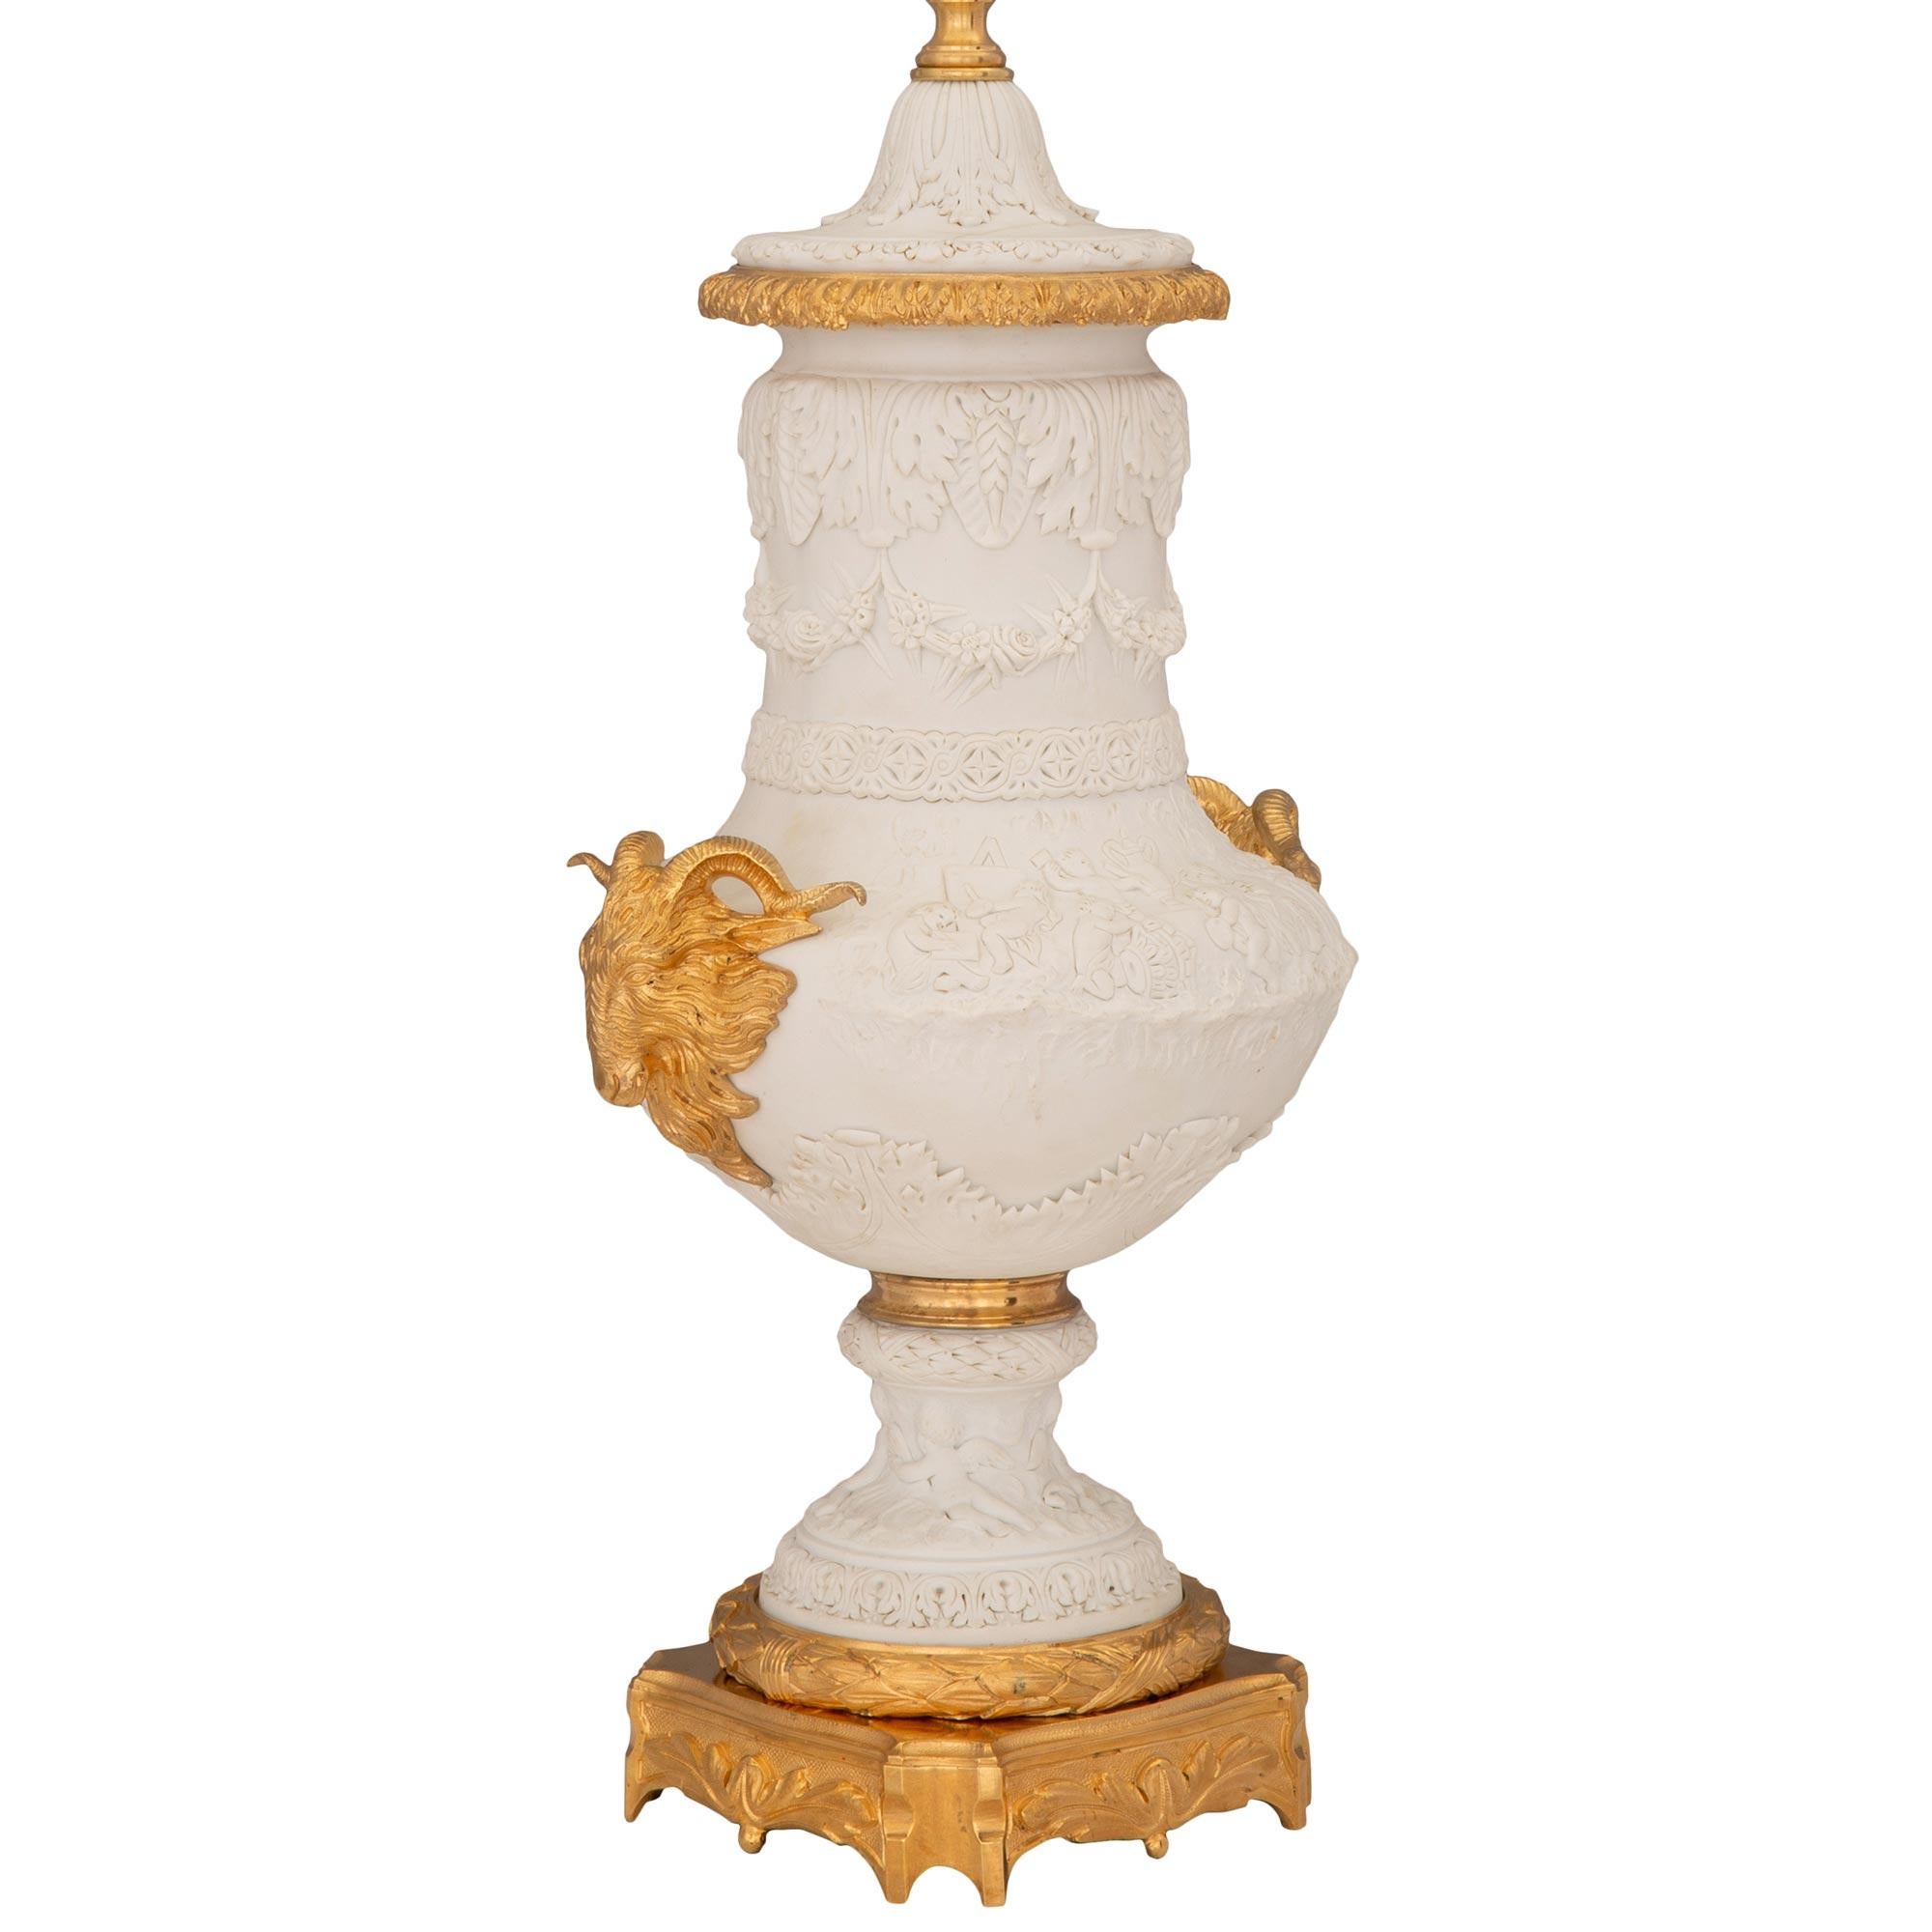 A stunning and extremely decorative French 19th century Louis XVI st. Biscuit de Sèvres porcelain and ormolu lamp. The lamp is raised by a beautiful square ormolu base with concave corners, charming foliate designs, and a finely detailed wrap around